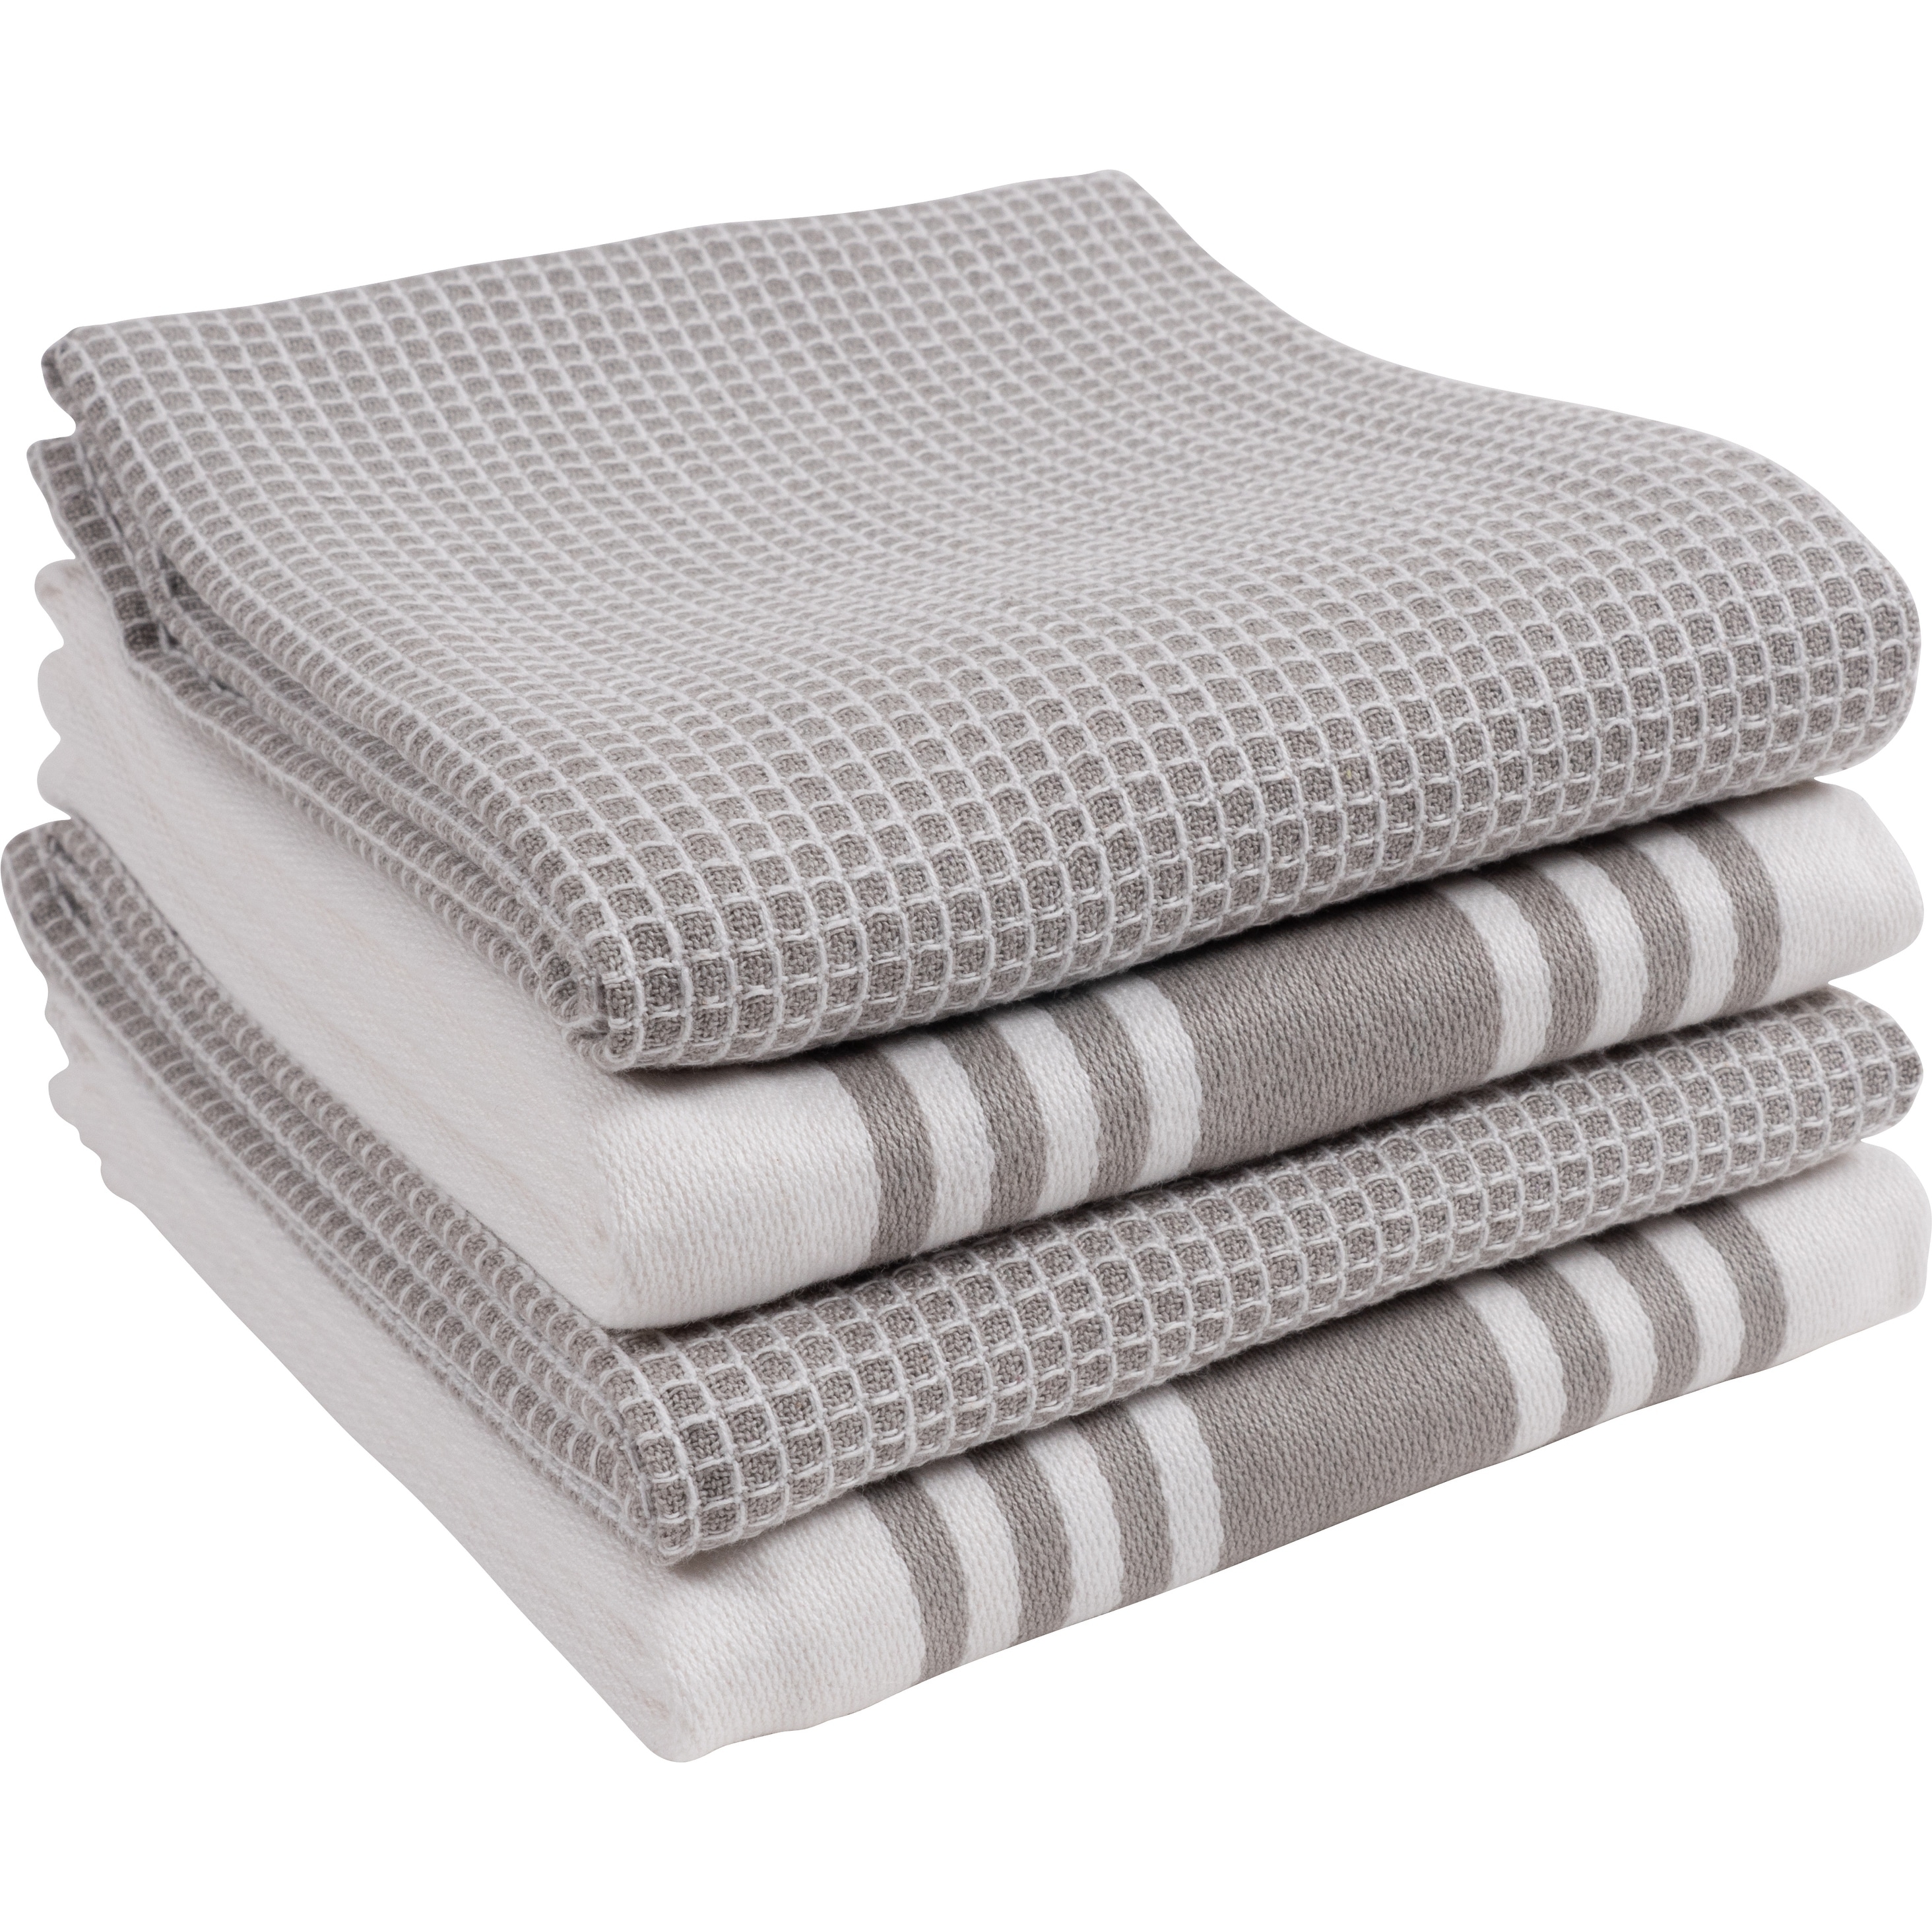 https://ak1.ostkcdn.com/images/products/is/images/direct/c04b35b87b8c4db509f809f8c73aa21317a13b3c/Centerband-and-Waffle-Kitchen-Towels%2C-Set-of-4.jpg